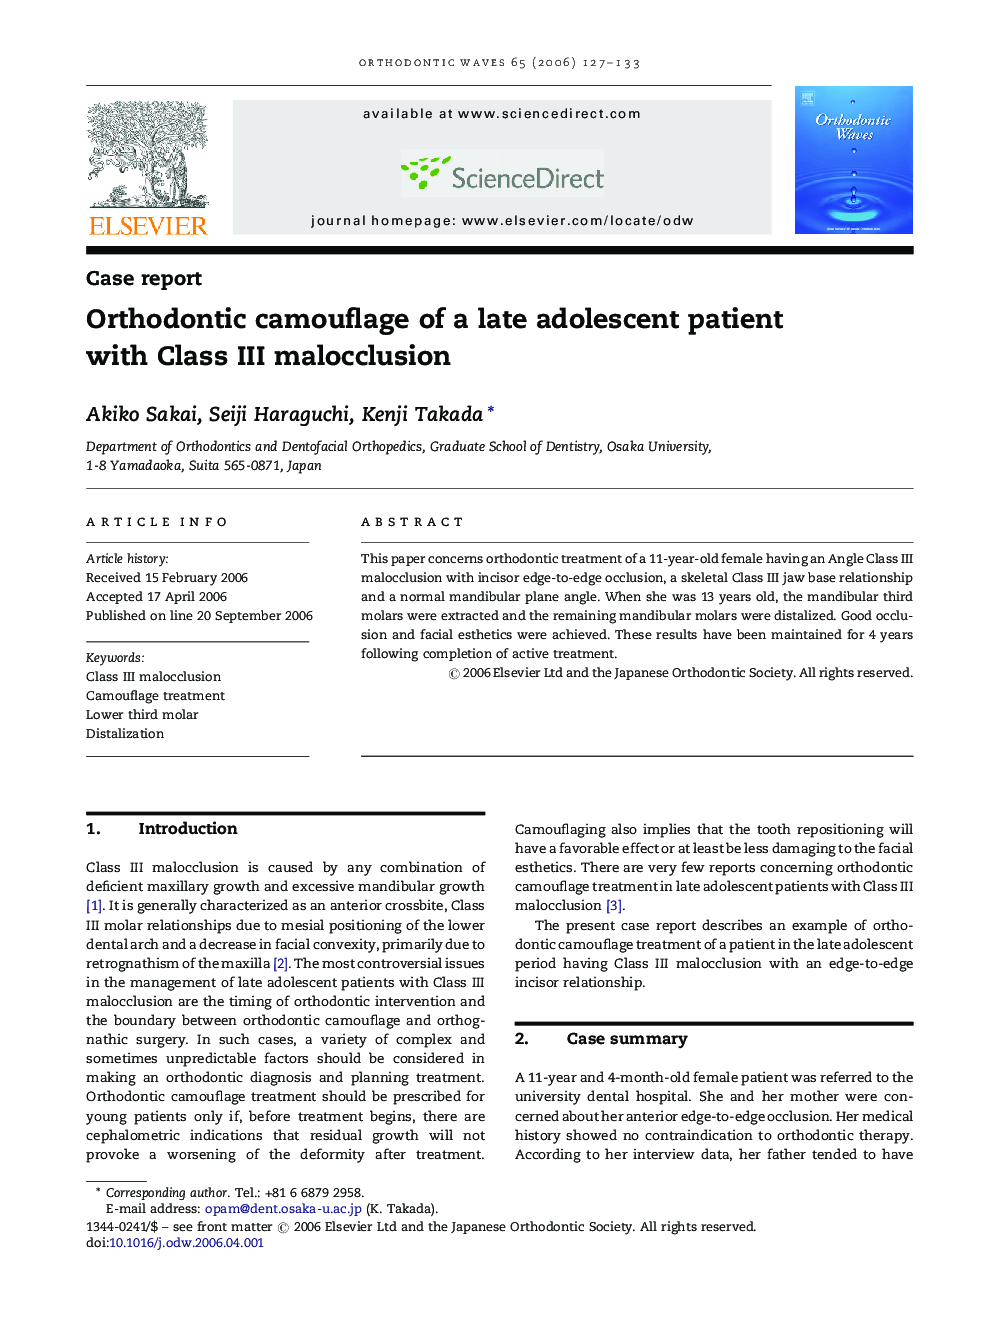 Orthodontic camouflage of a late adolescent patient with Class III malocclusion